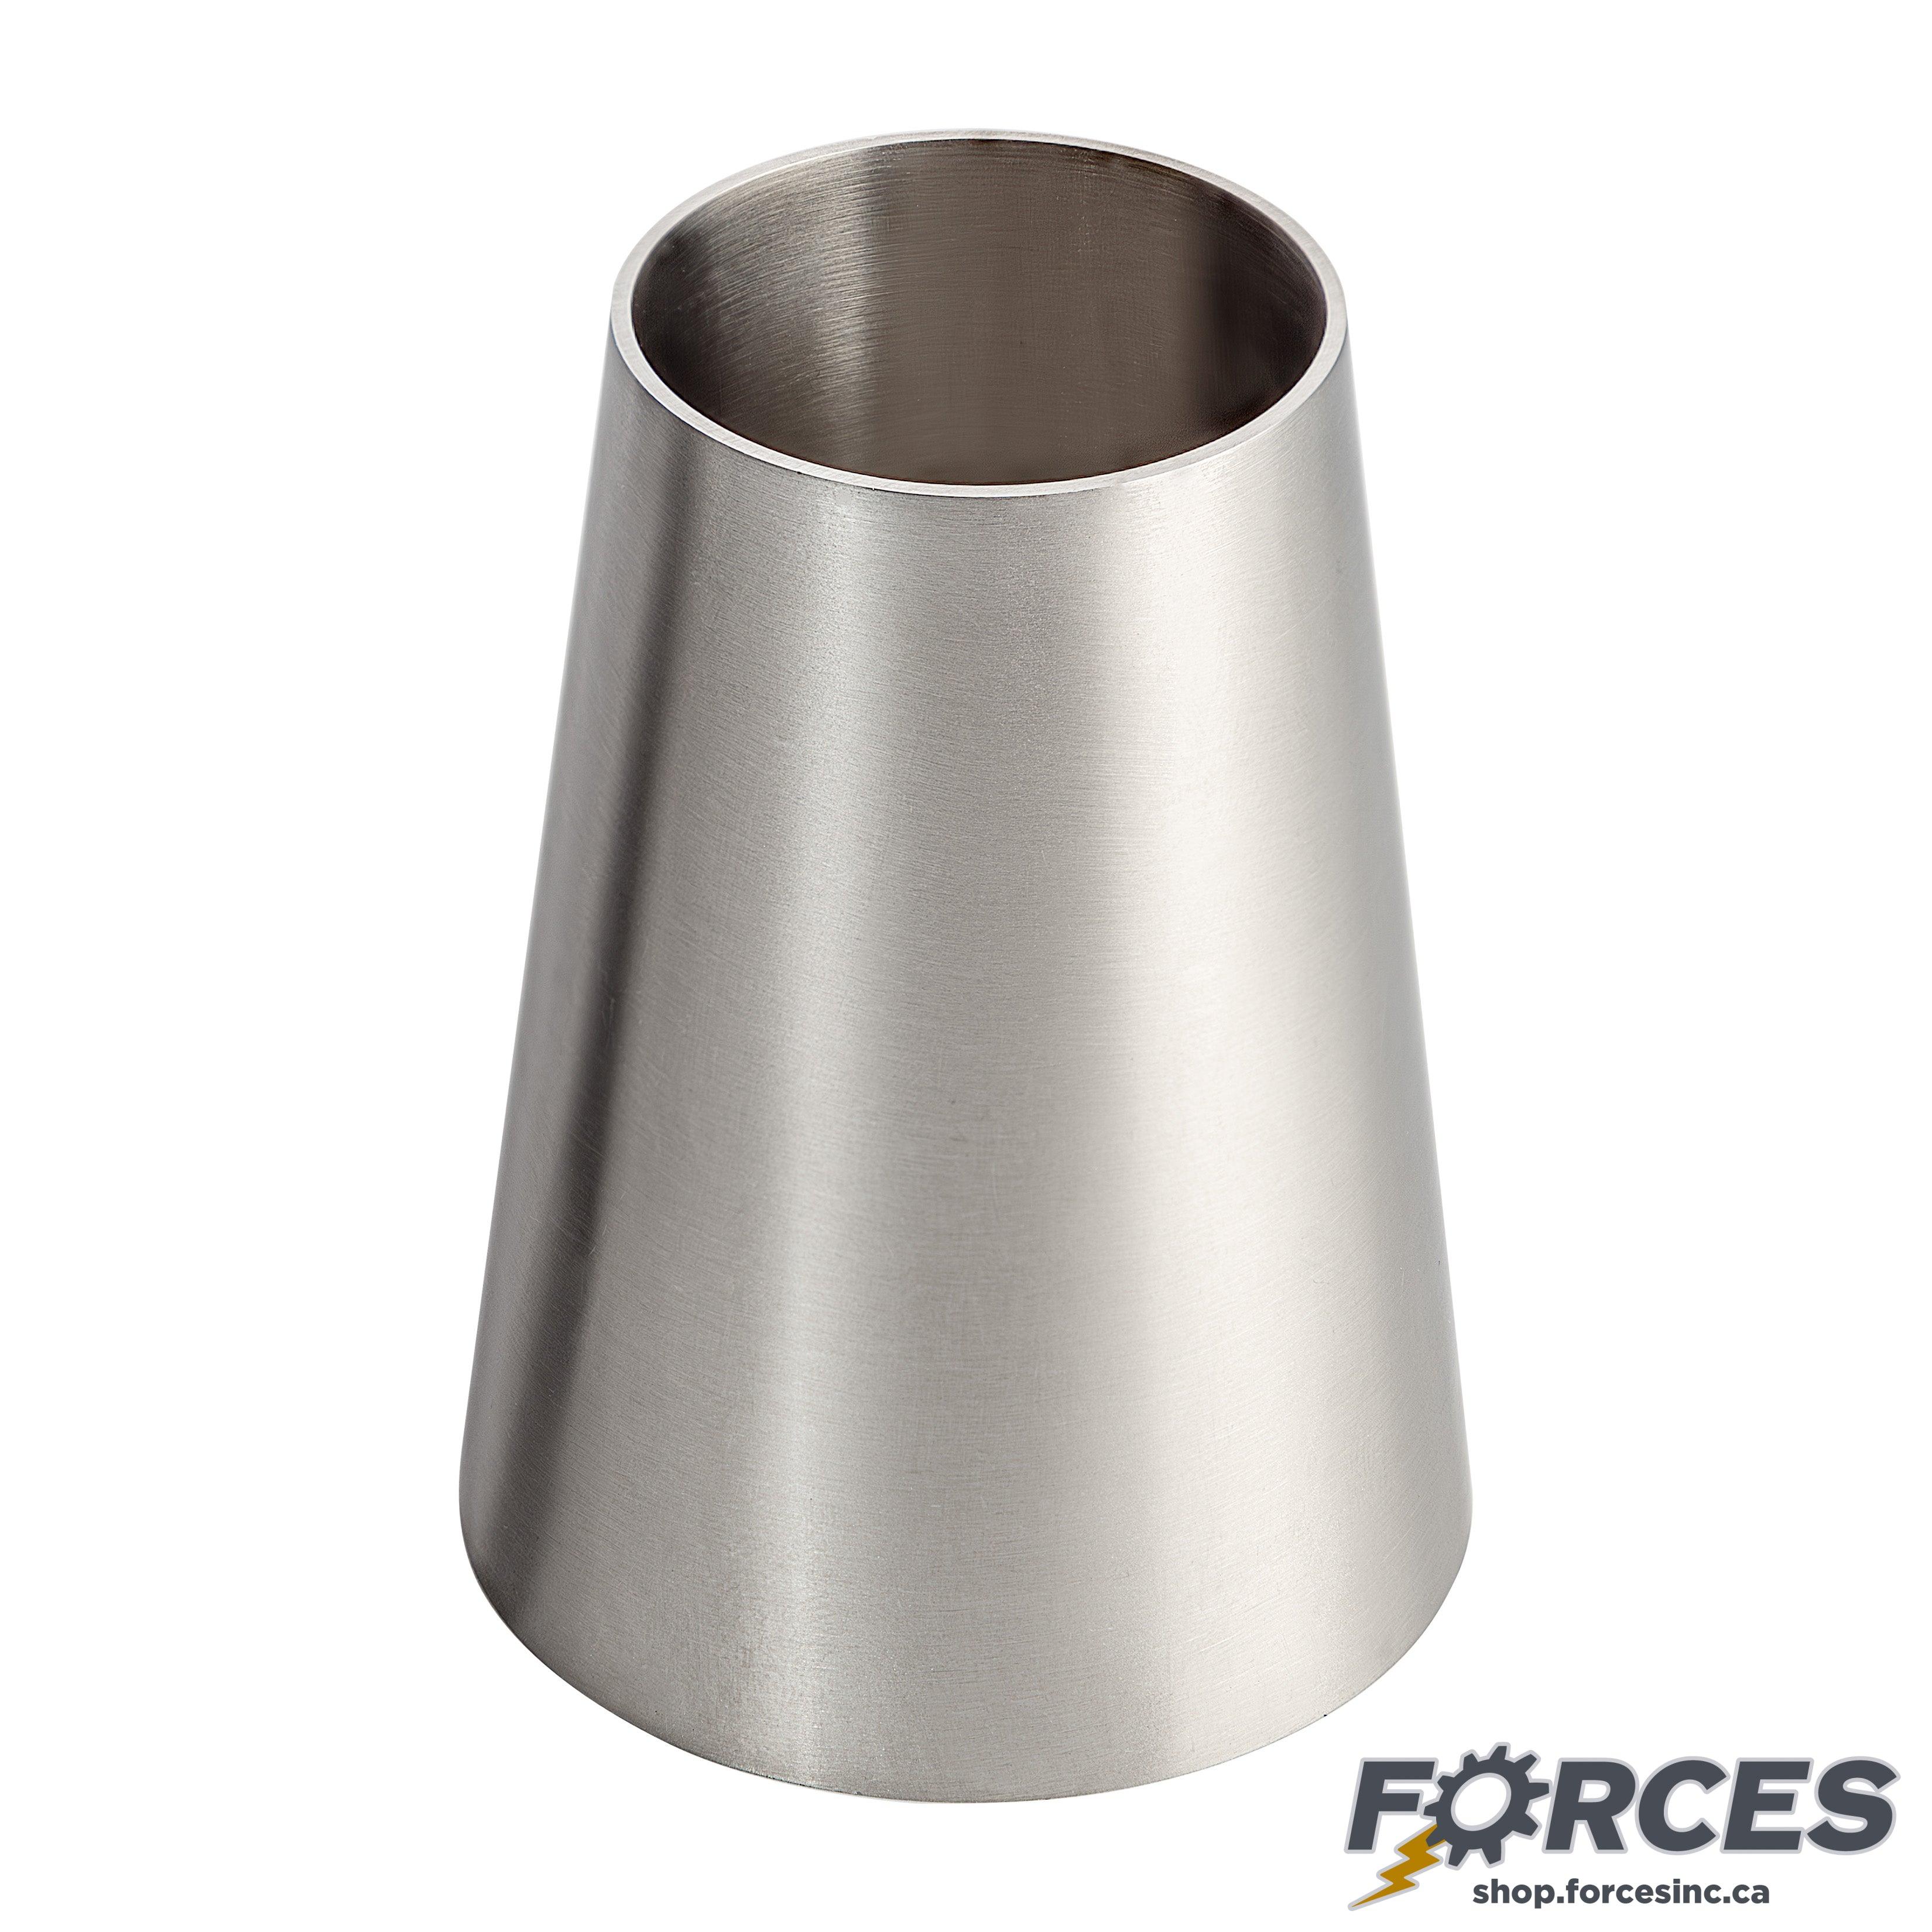 2" x 1" Butt Weld Concentric Reducer - Stainless Steel 304 - Forces Inc